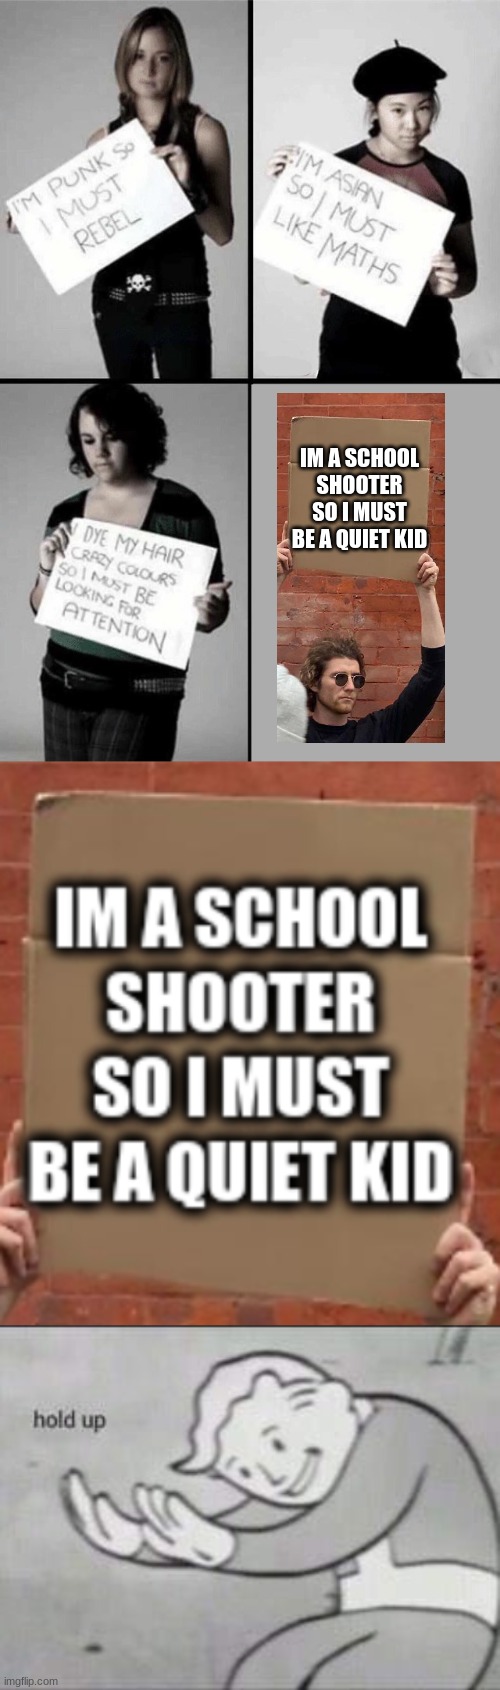 IM A SCHOOL SHOOTER SO I MUST BE A QUIET KID | image tagged in im punk so i must rebel,fallout hold up | made w/ Imgflip meme maker